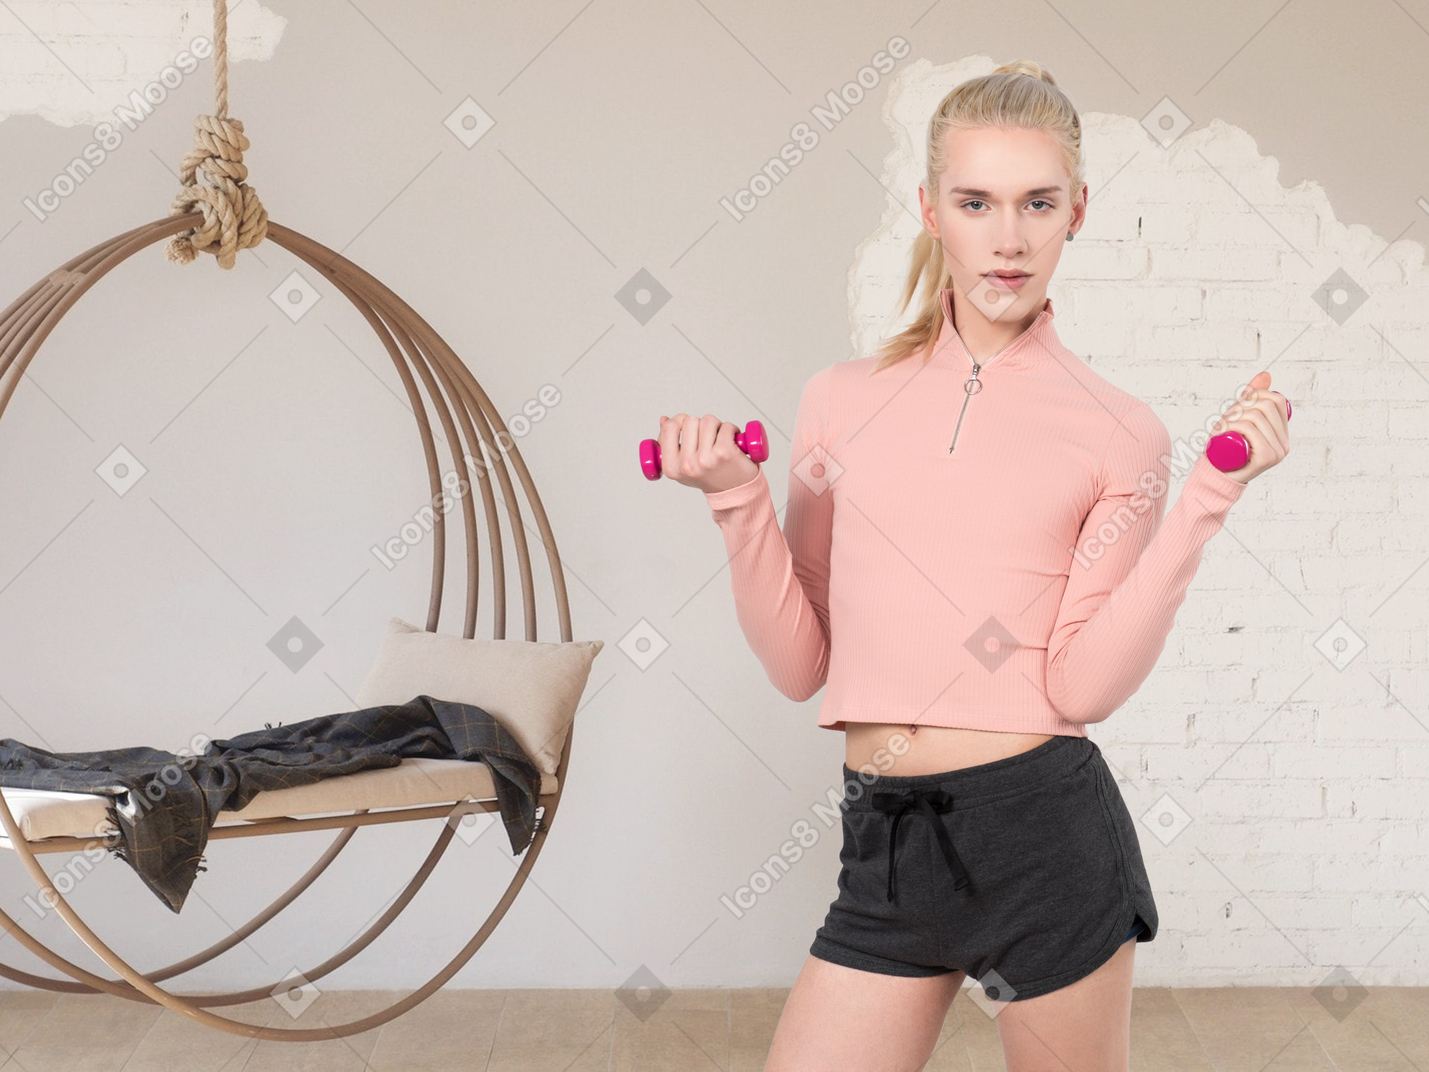 Person exercising at home